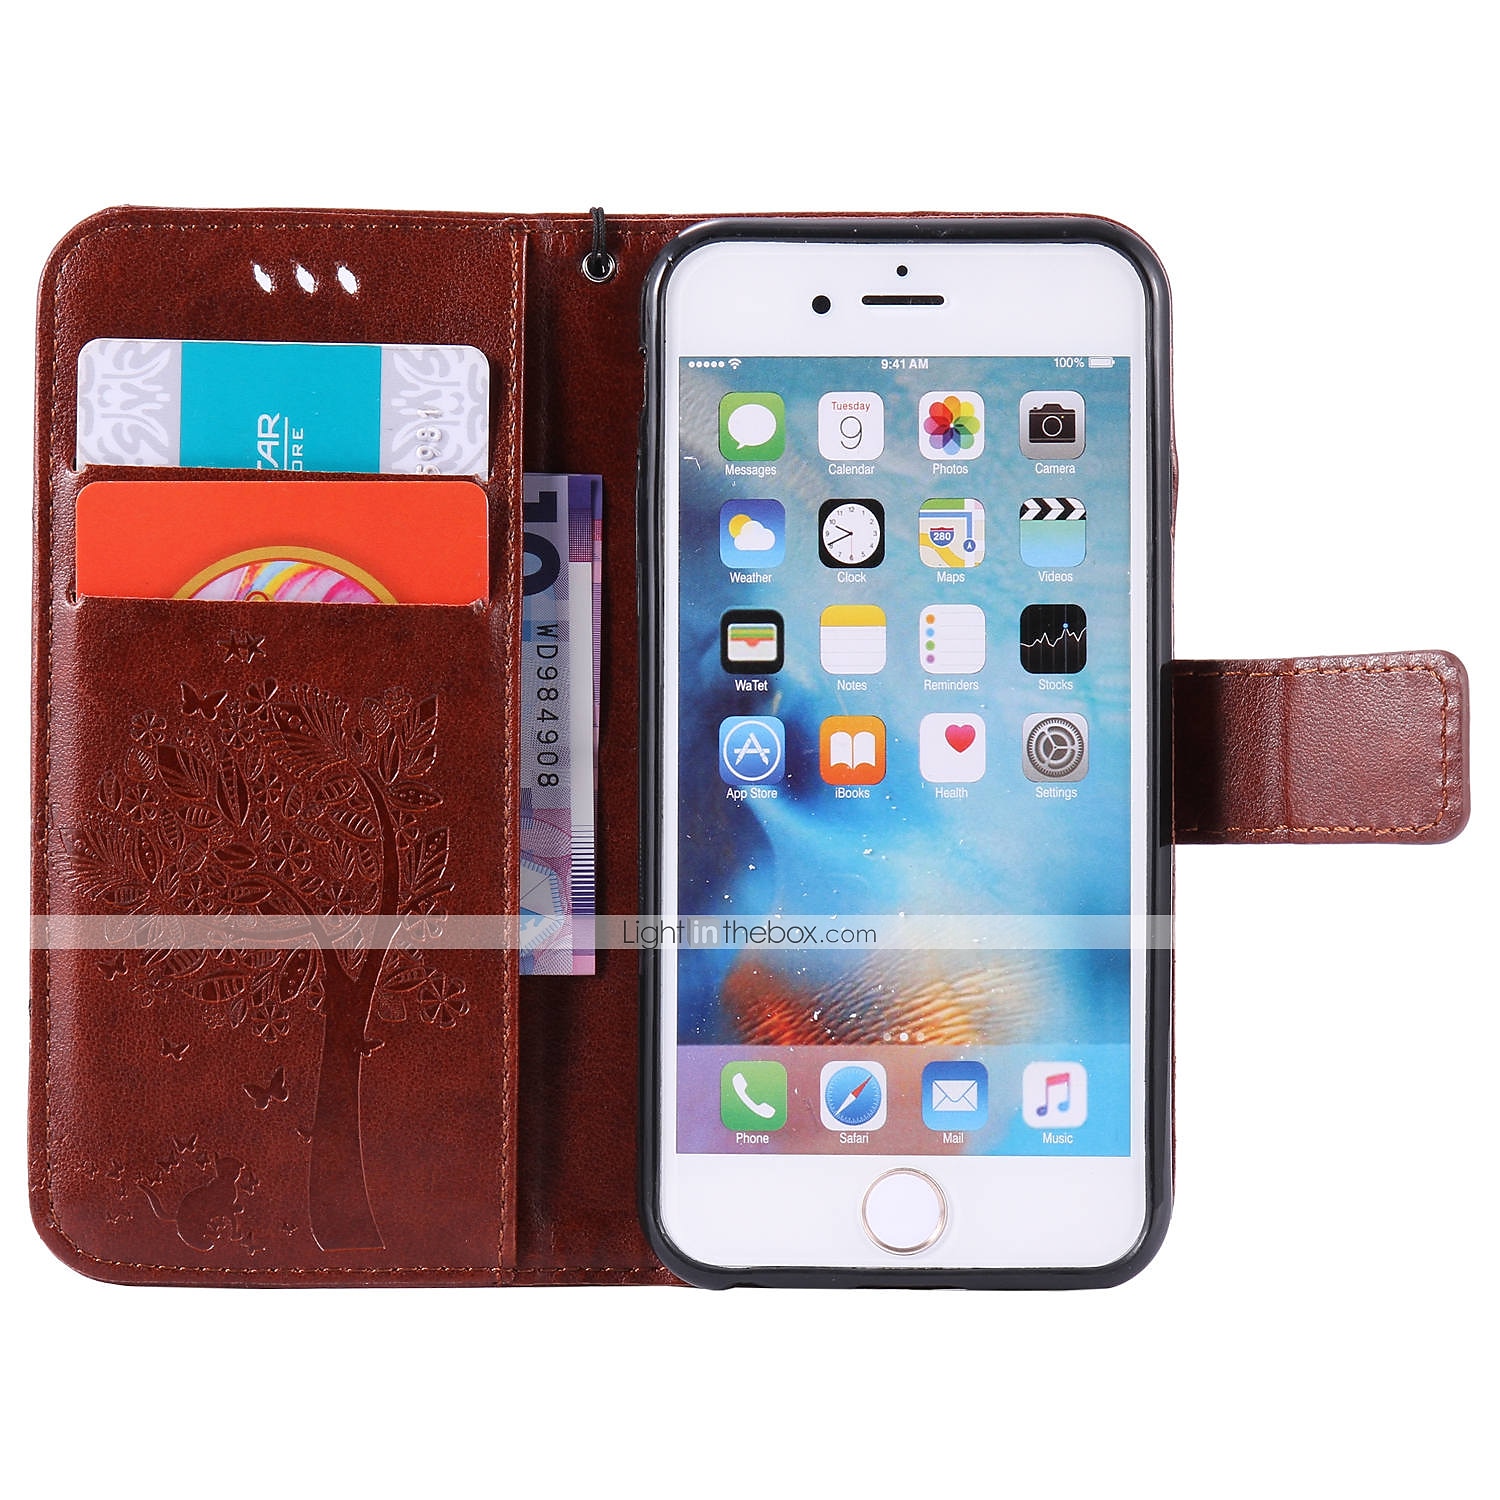 iPhone 6 Case iPhone 6s Wallet Blue JAMMYLIZARD Leather Wallet Flip Cover for iPhone 6 / 6s 4.7